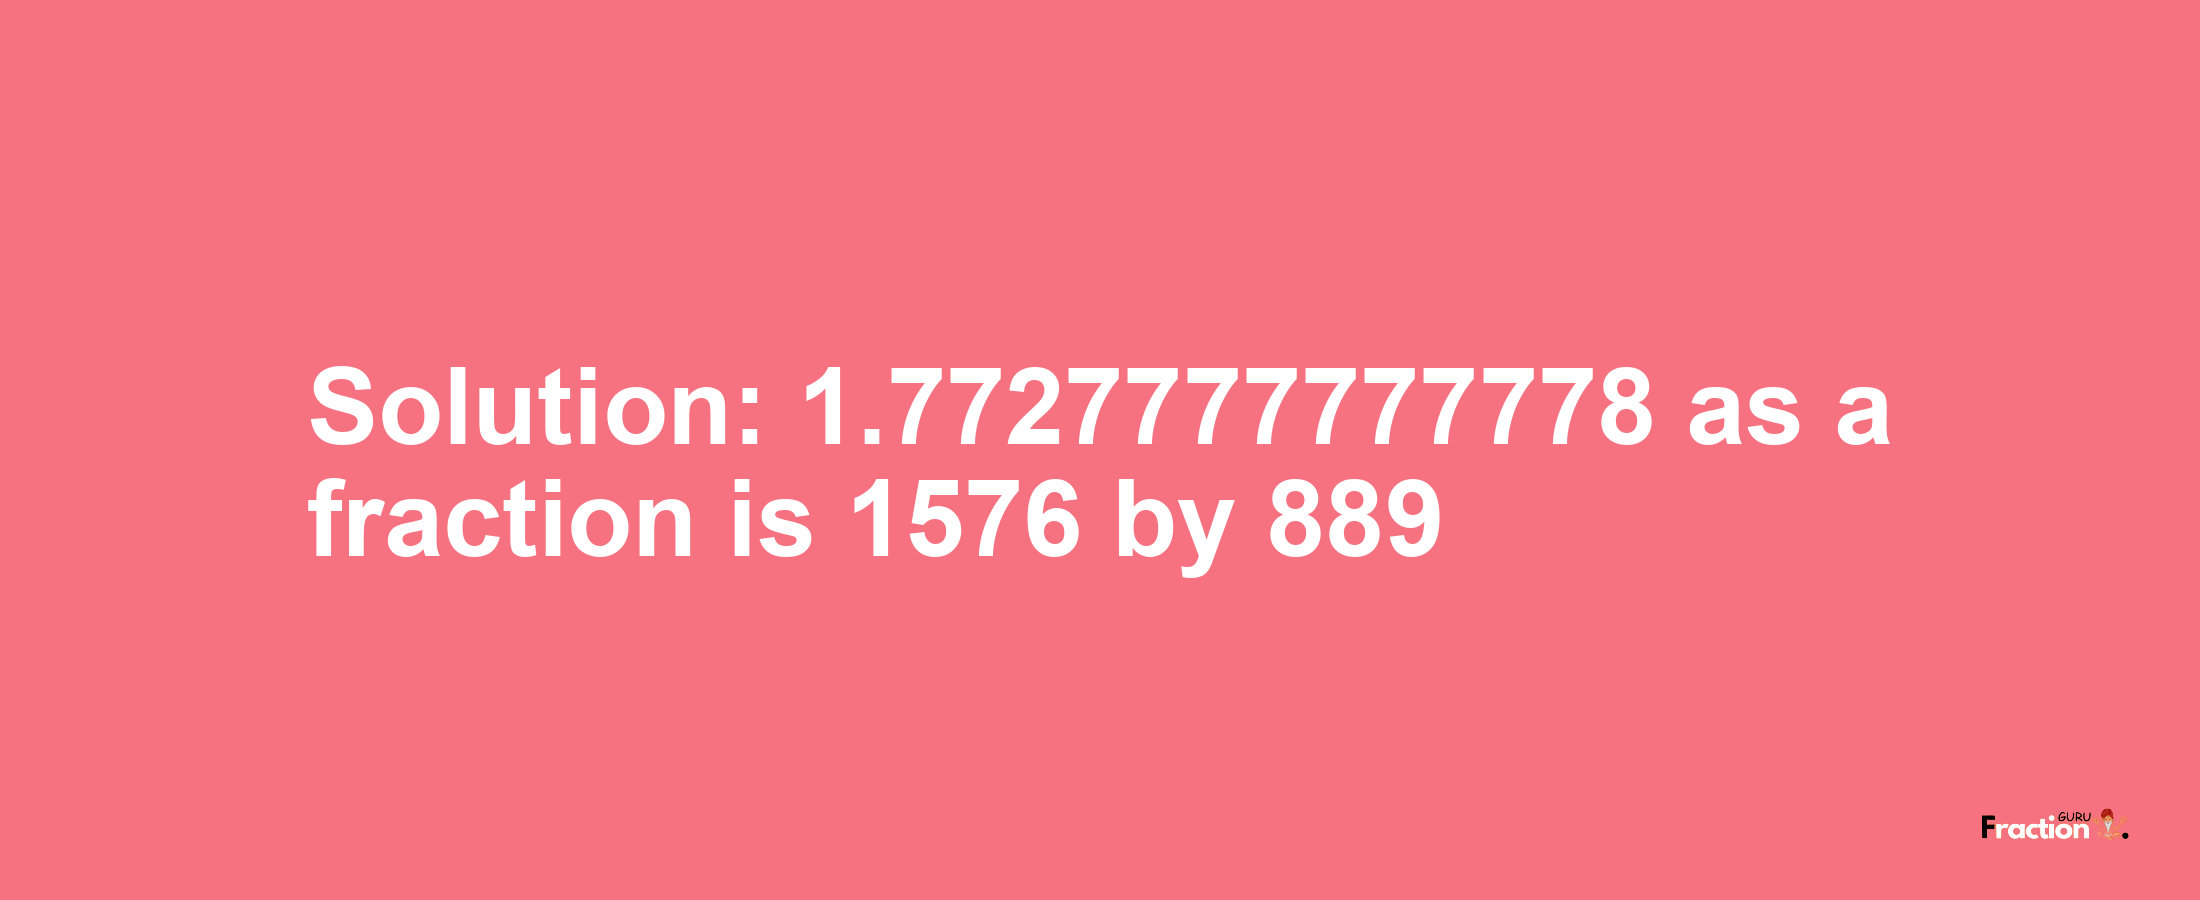 Solution:1.7727777777778 as a fraction is 1576/889